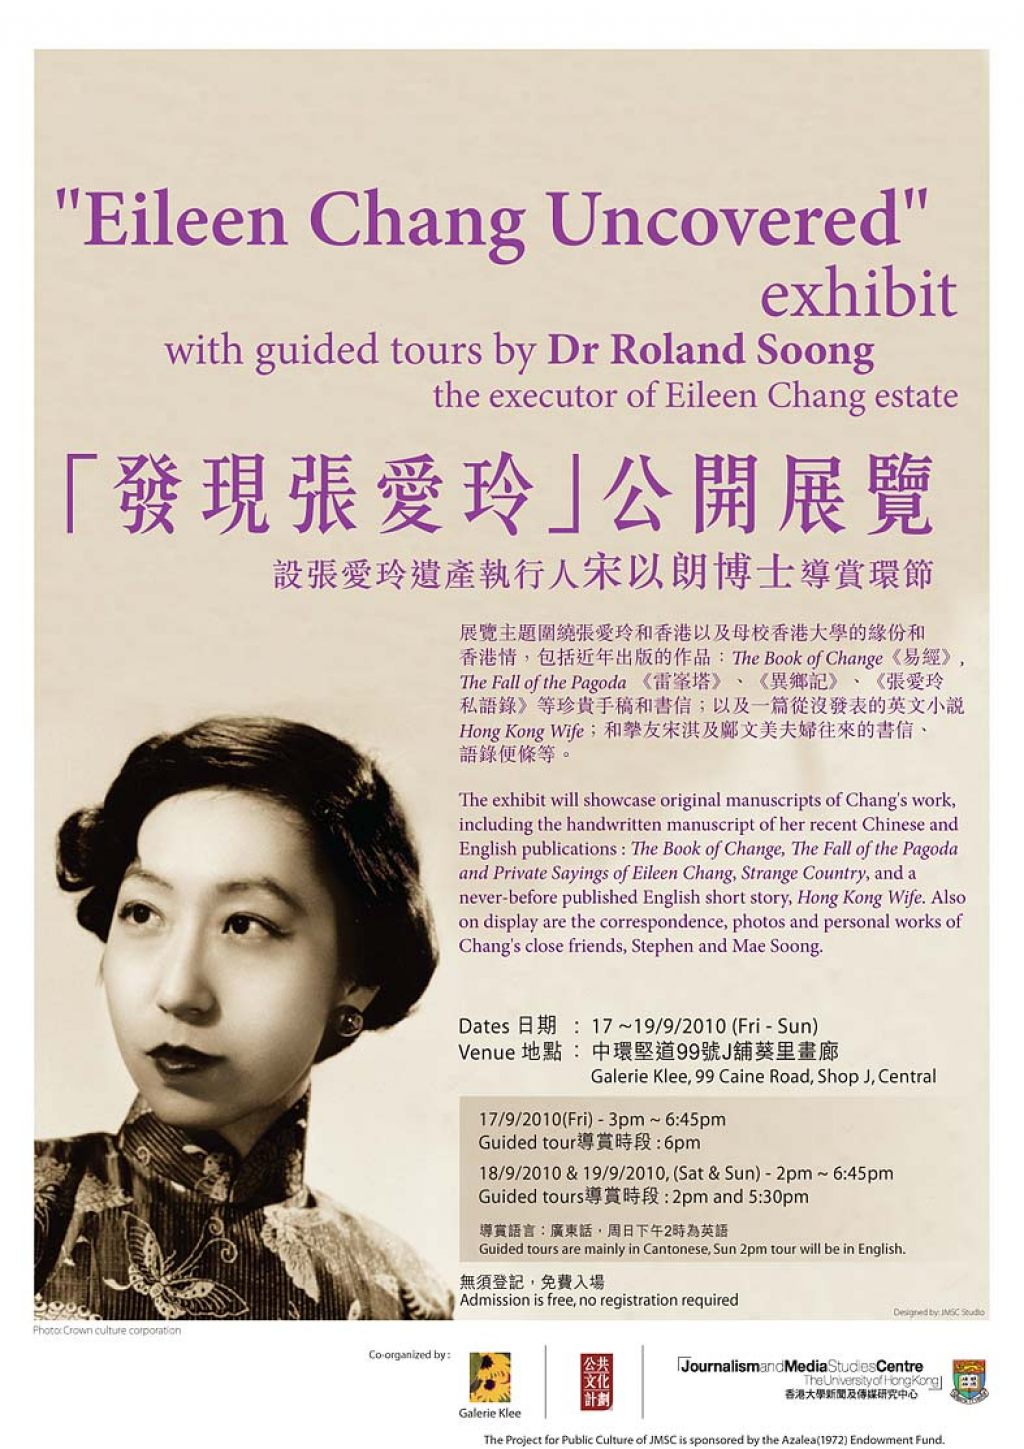 Eileen Chang Uncovered exhibition